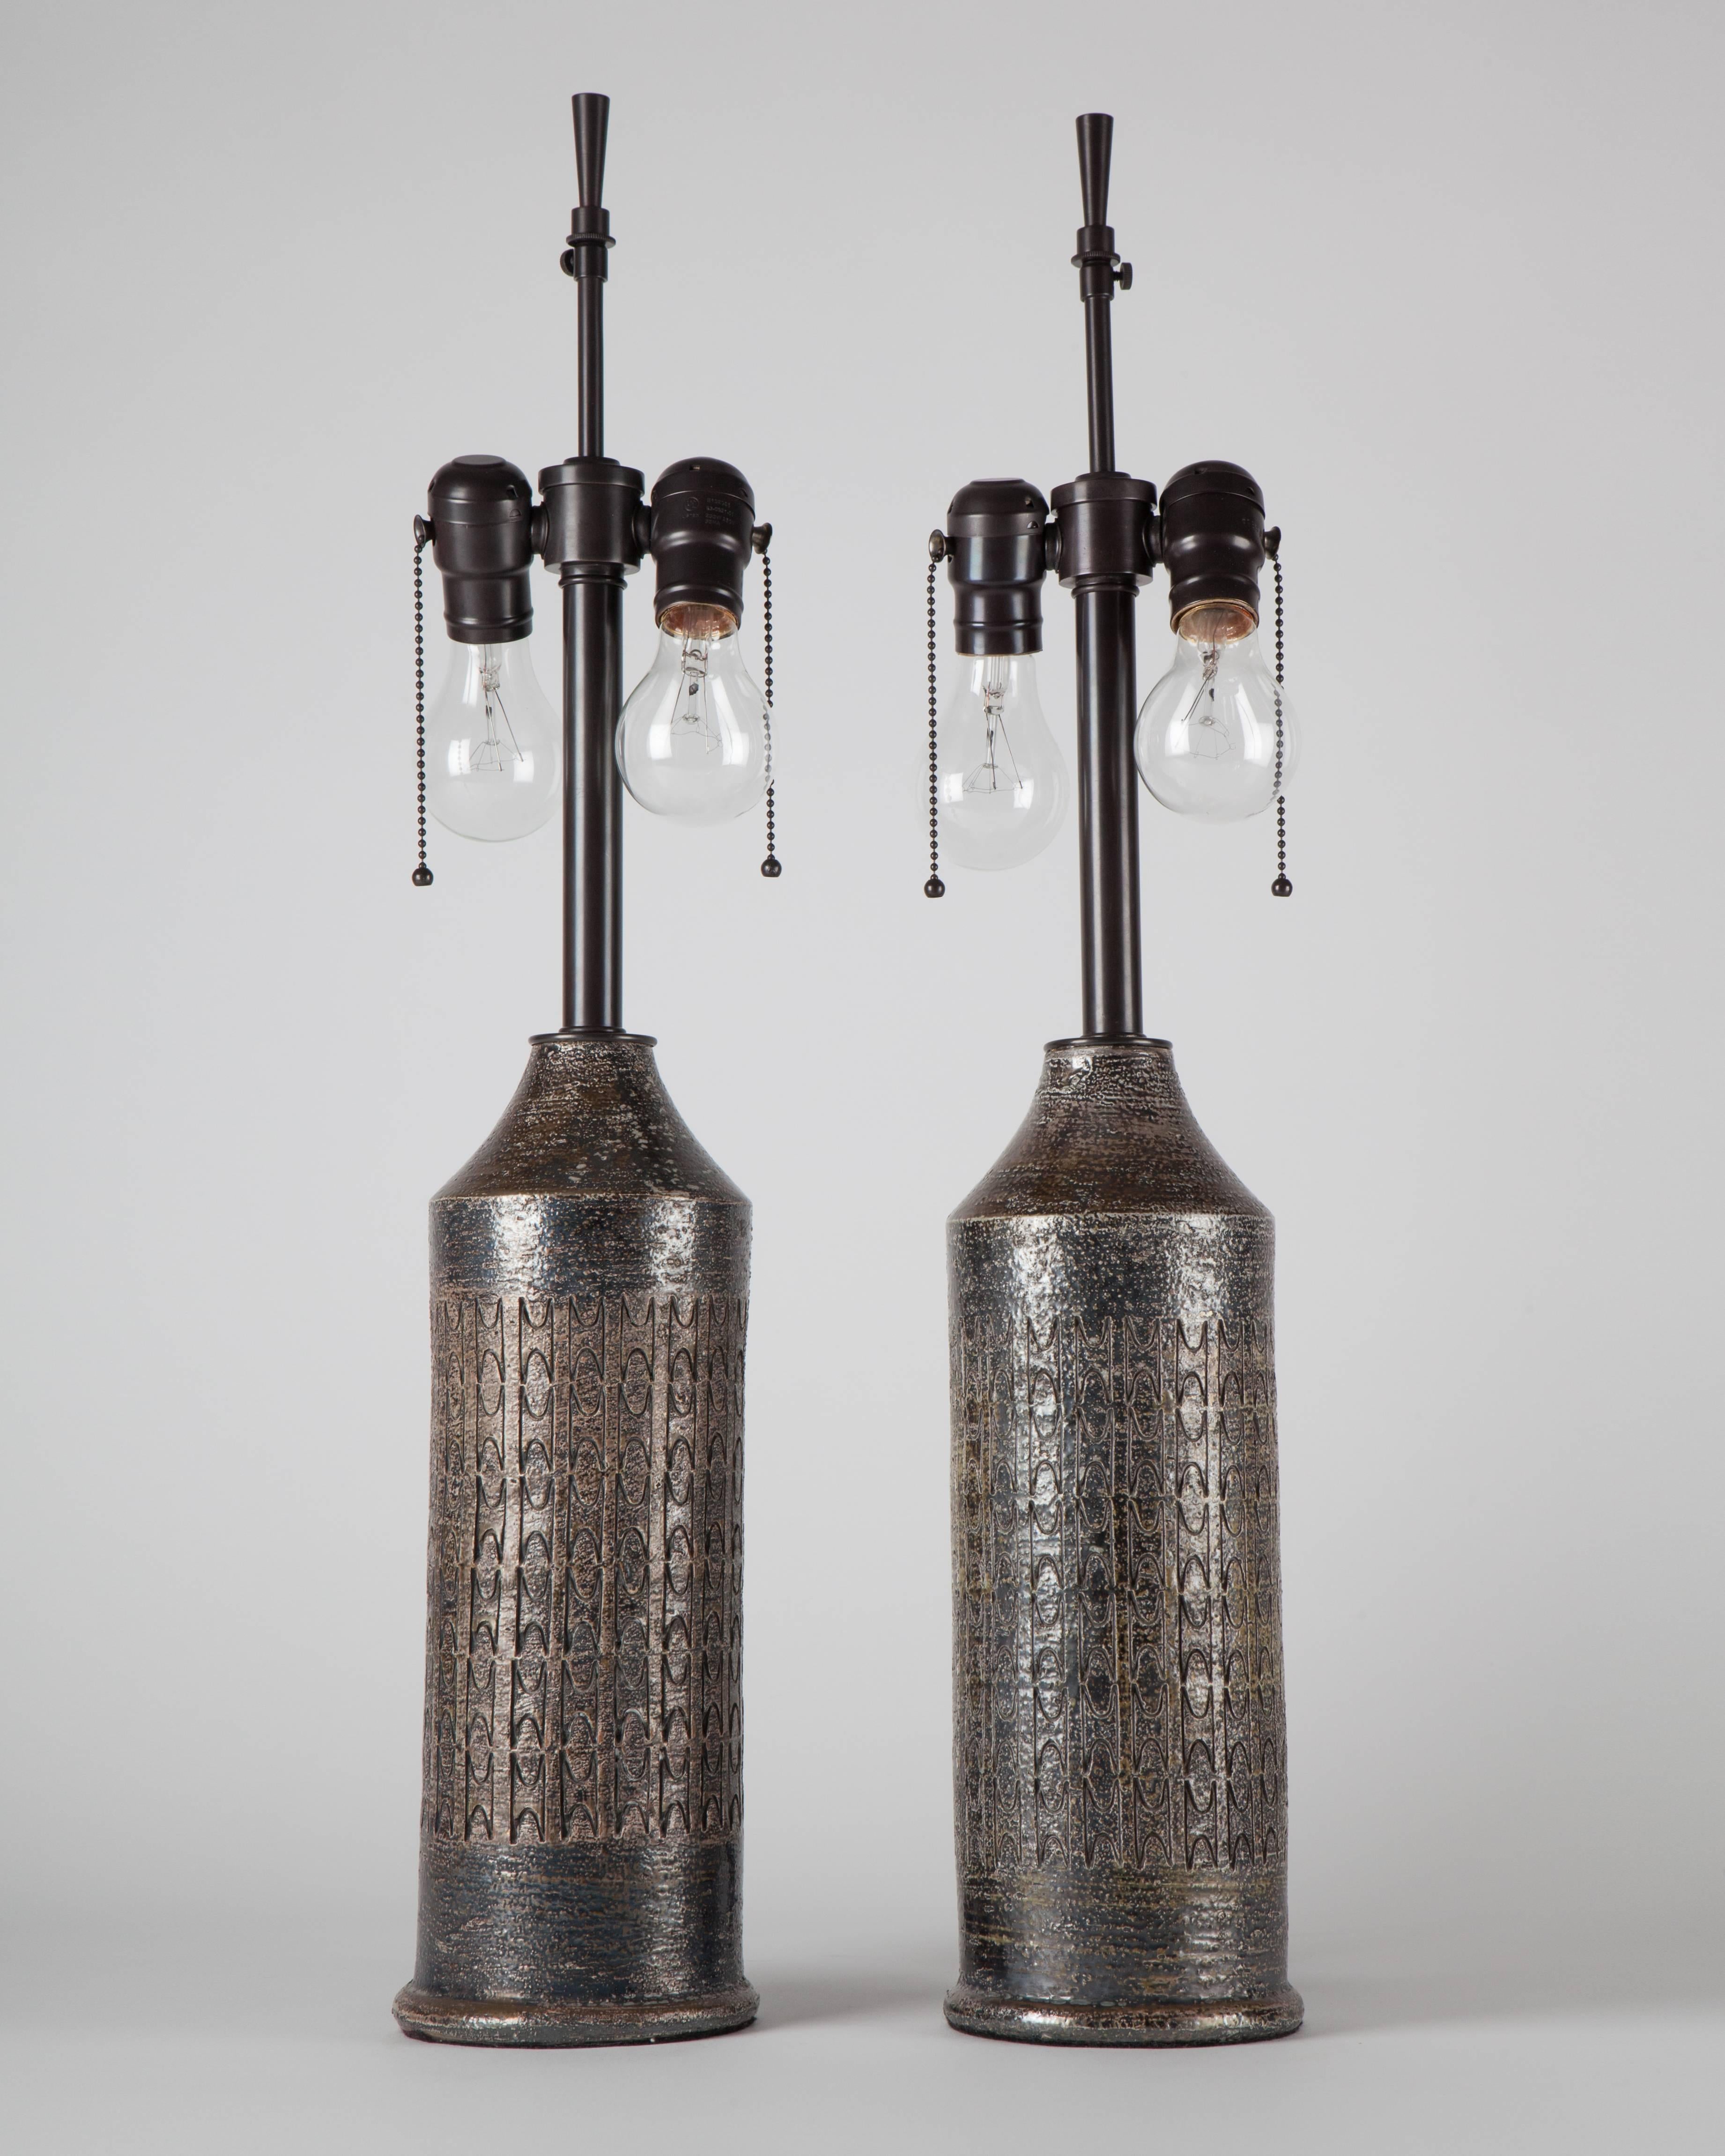 ATL1945

A pair of ceramic lamps, each having an incised geometric pattern, in a metallic textured glaze with darkened brass fittings. Signed by the Swedish marker Bergboms. Due to the antique nature of this fixture, there are some nicks or